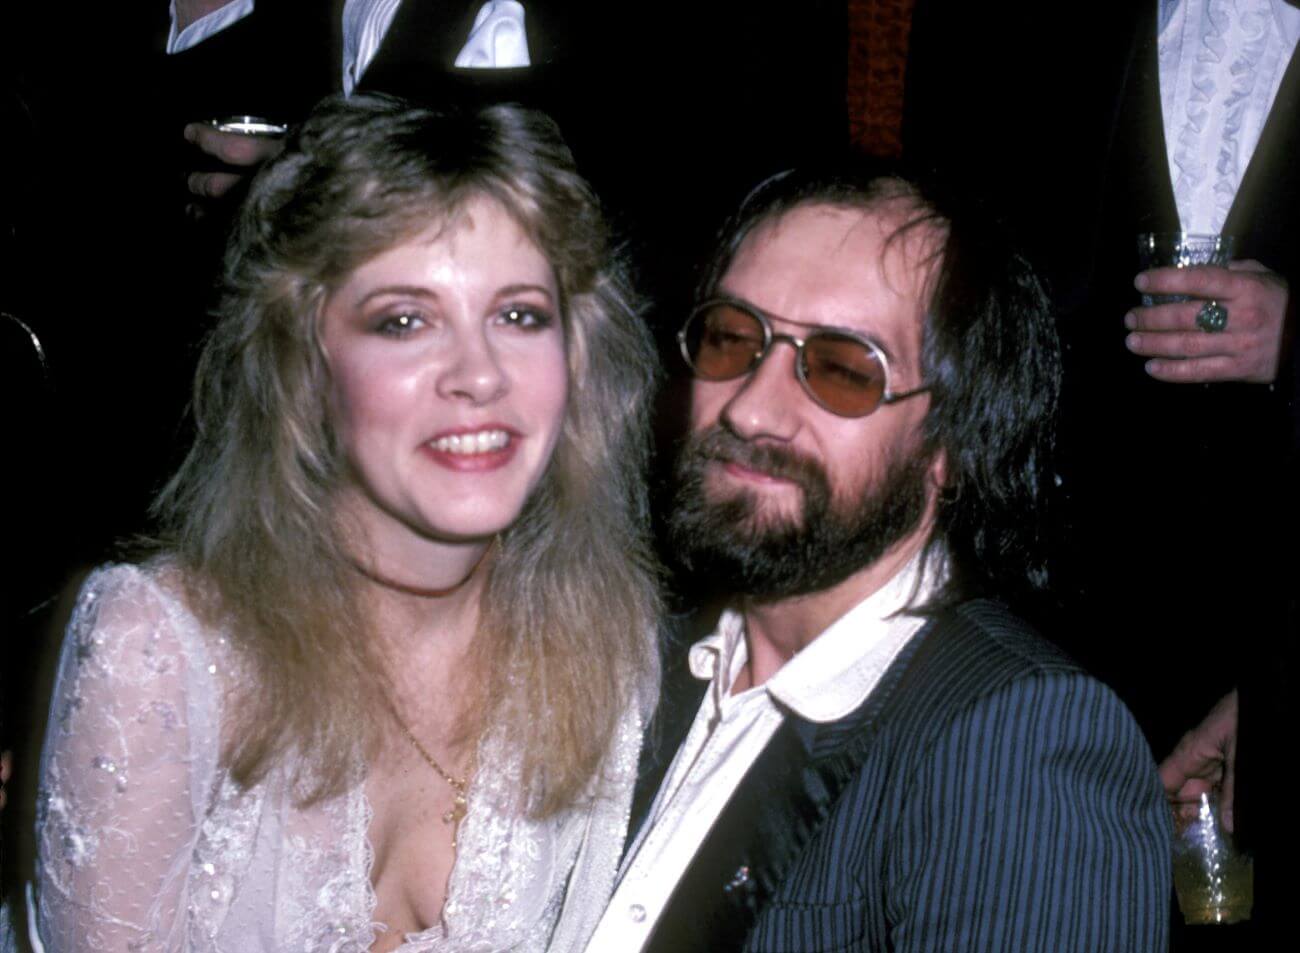 Stevie Nicks wears a white dress and sits on Mick Fleetwood's lap. He wears sunglasses.